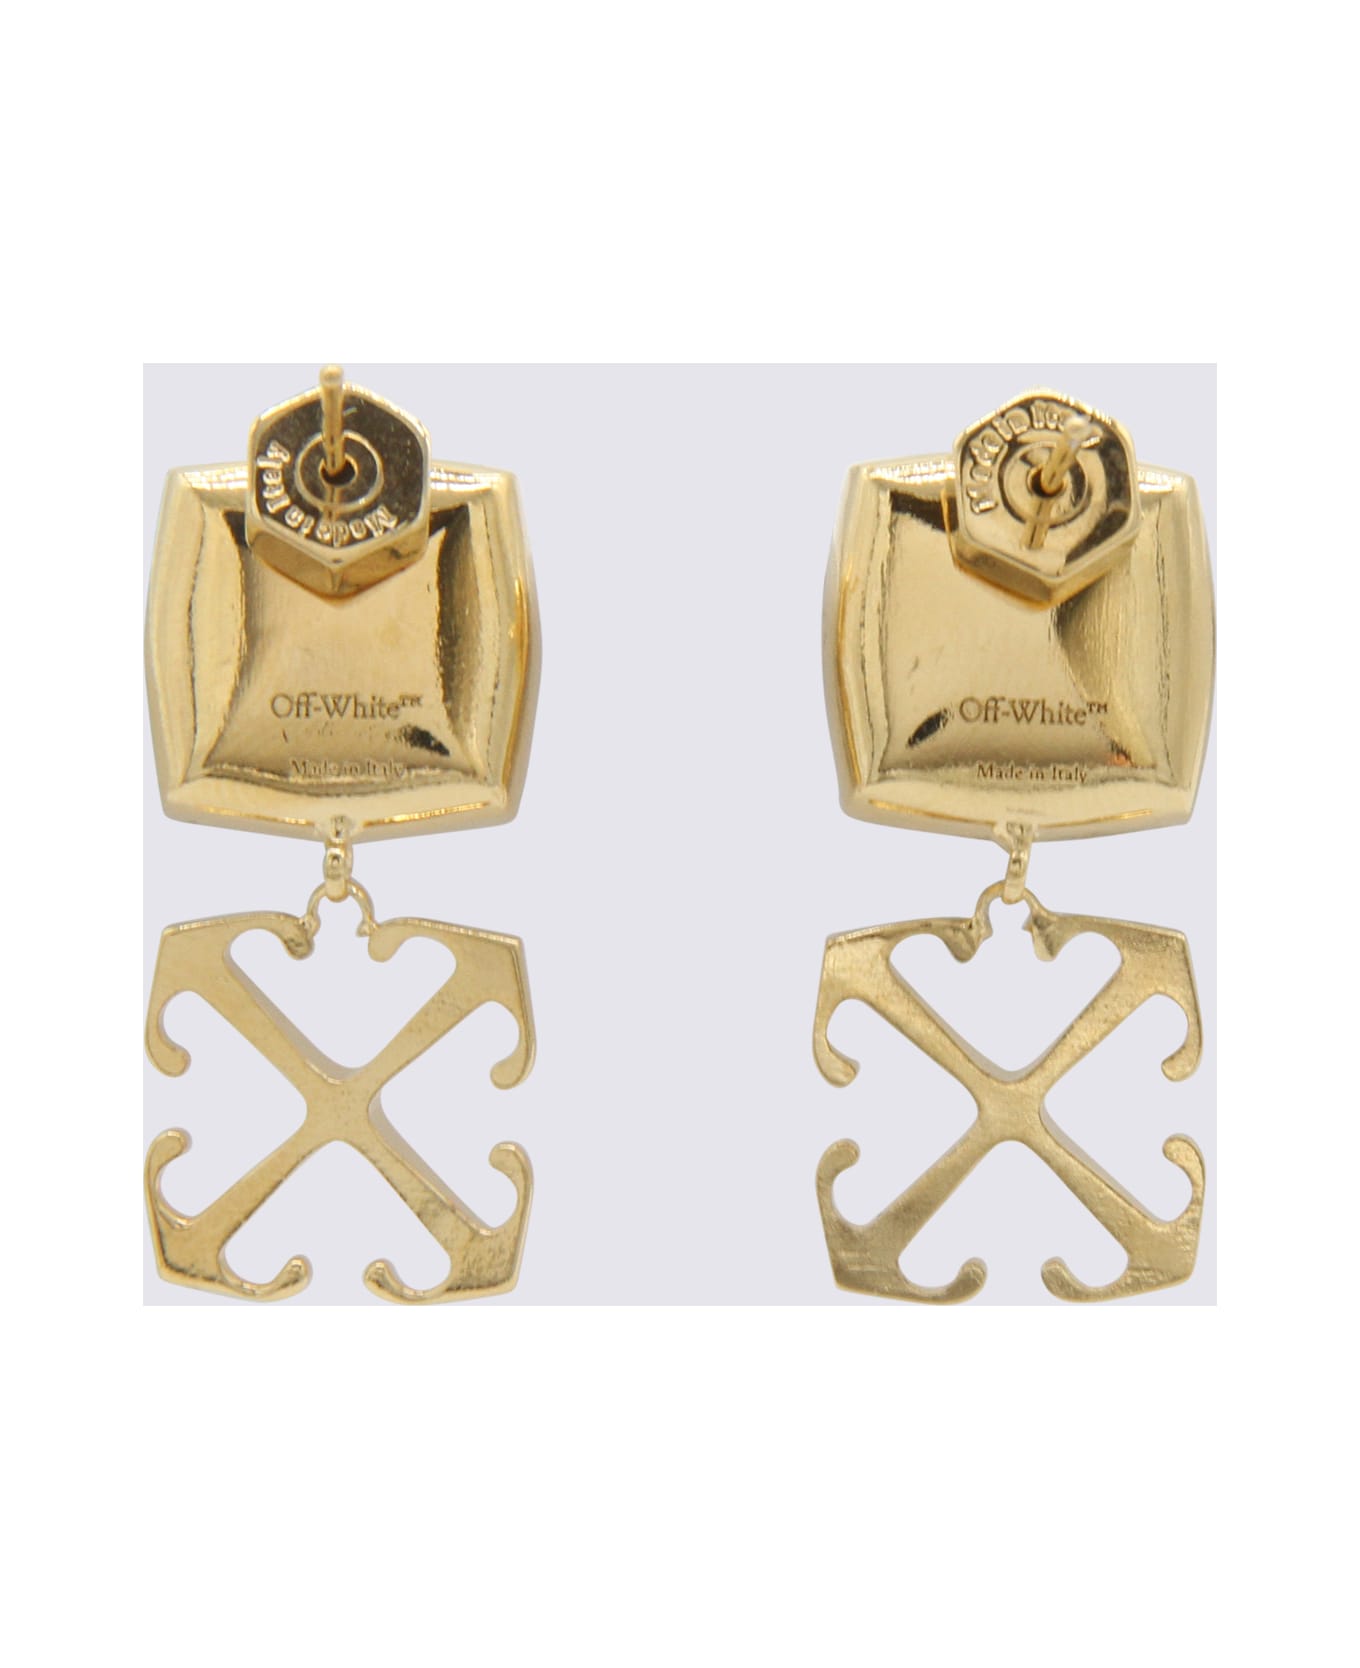 Off-White Gold Brass And Crystal Arrows Earrings - Golden イヤリング